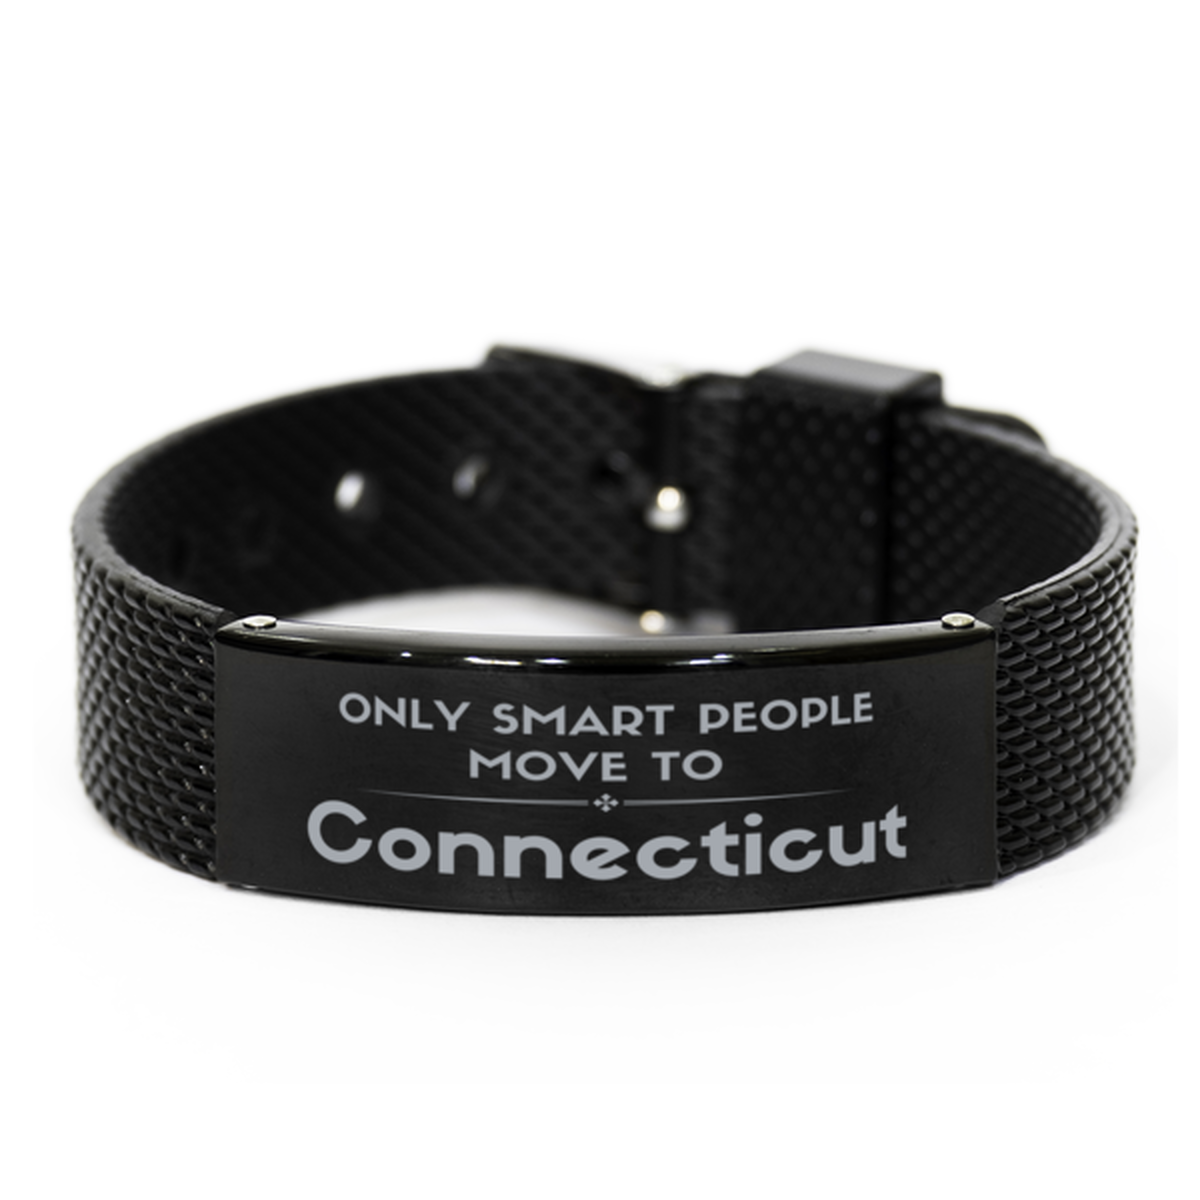 Only smart people move to Connecticut Black Shark Mesh Bracelet, Gag Gifts For Connecticut, Move to Connecticut Gifts for Friends Coworker Funny Saying Quote